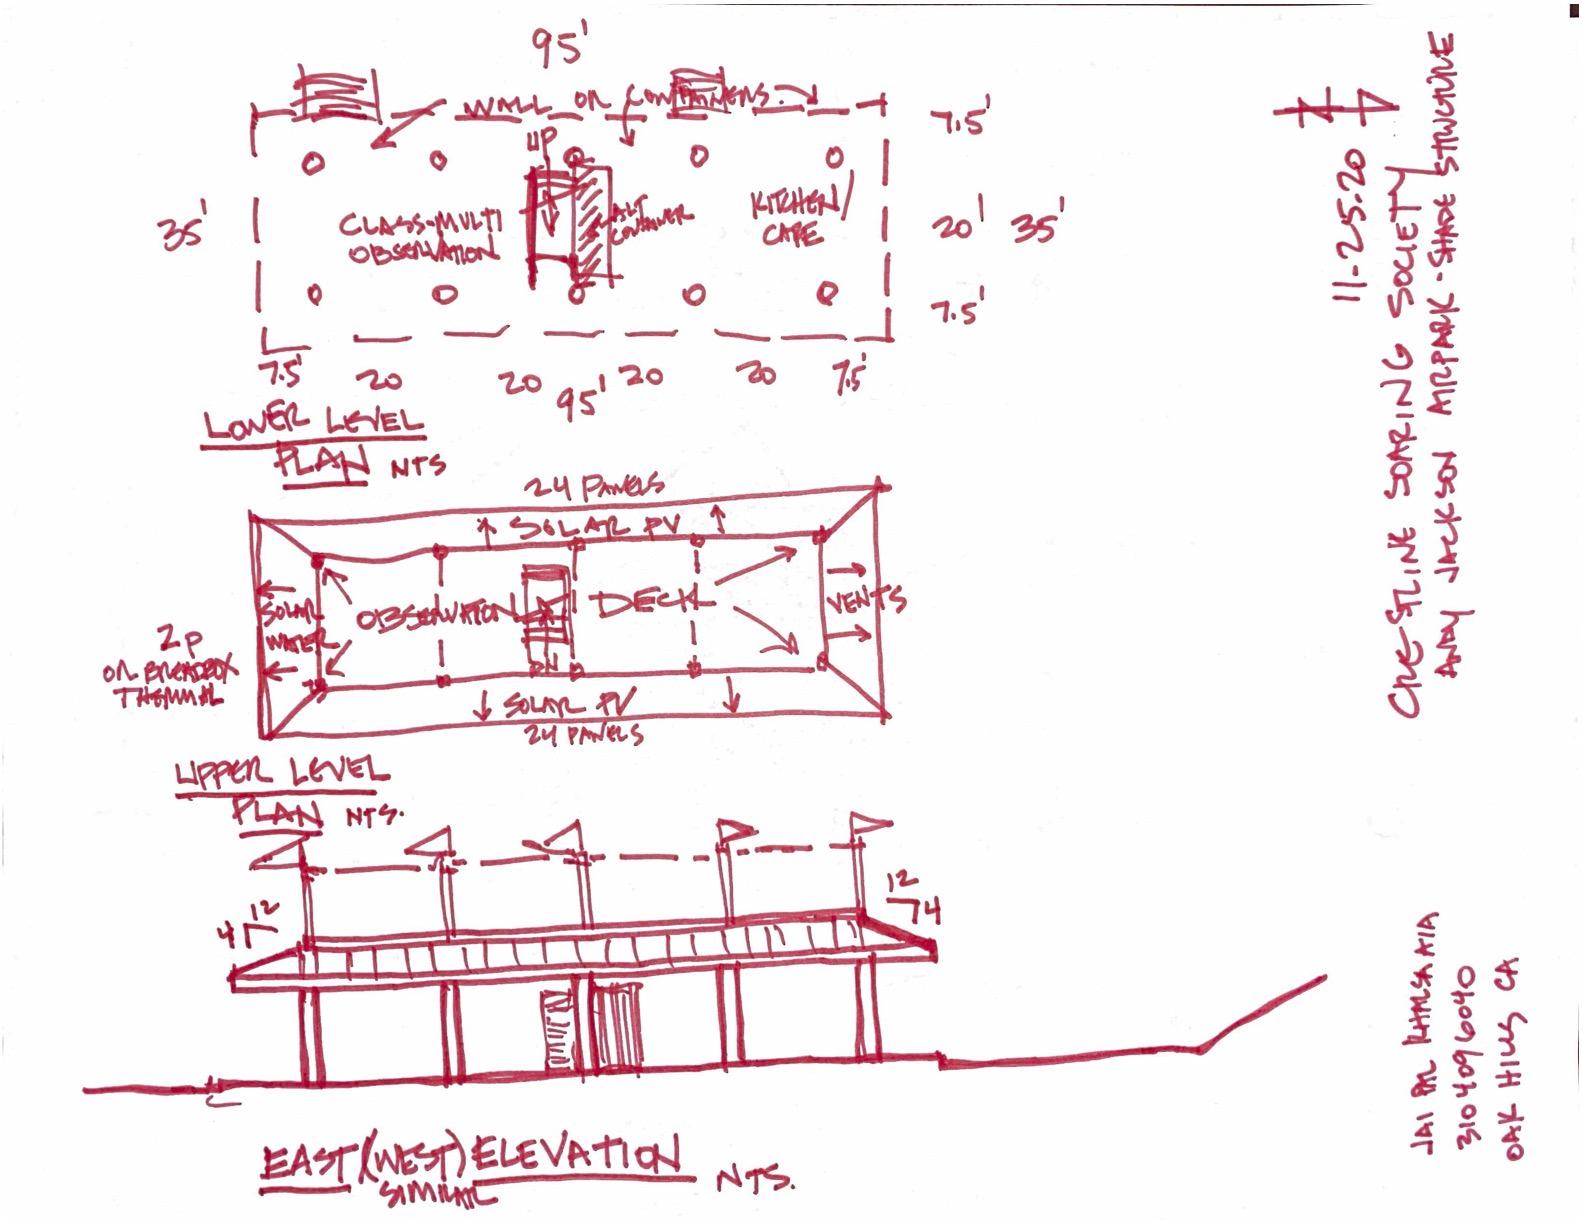 CSS Shade Structure sketches 2 Doc - Nov 27 2020 - 9-06 AM